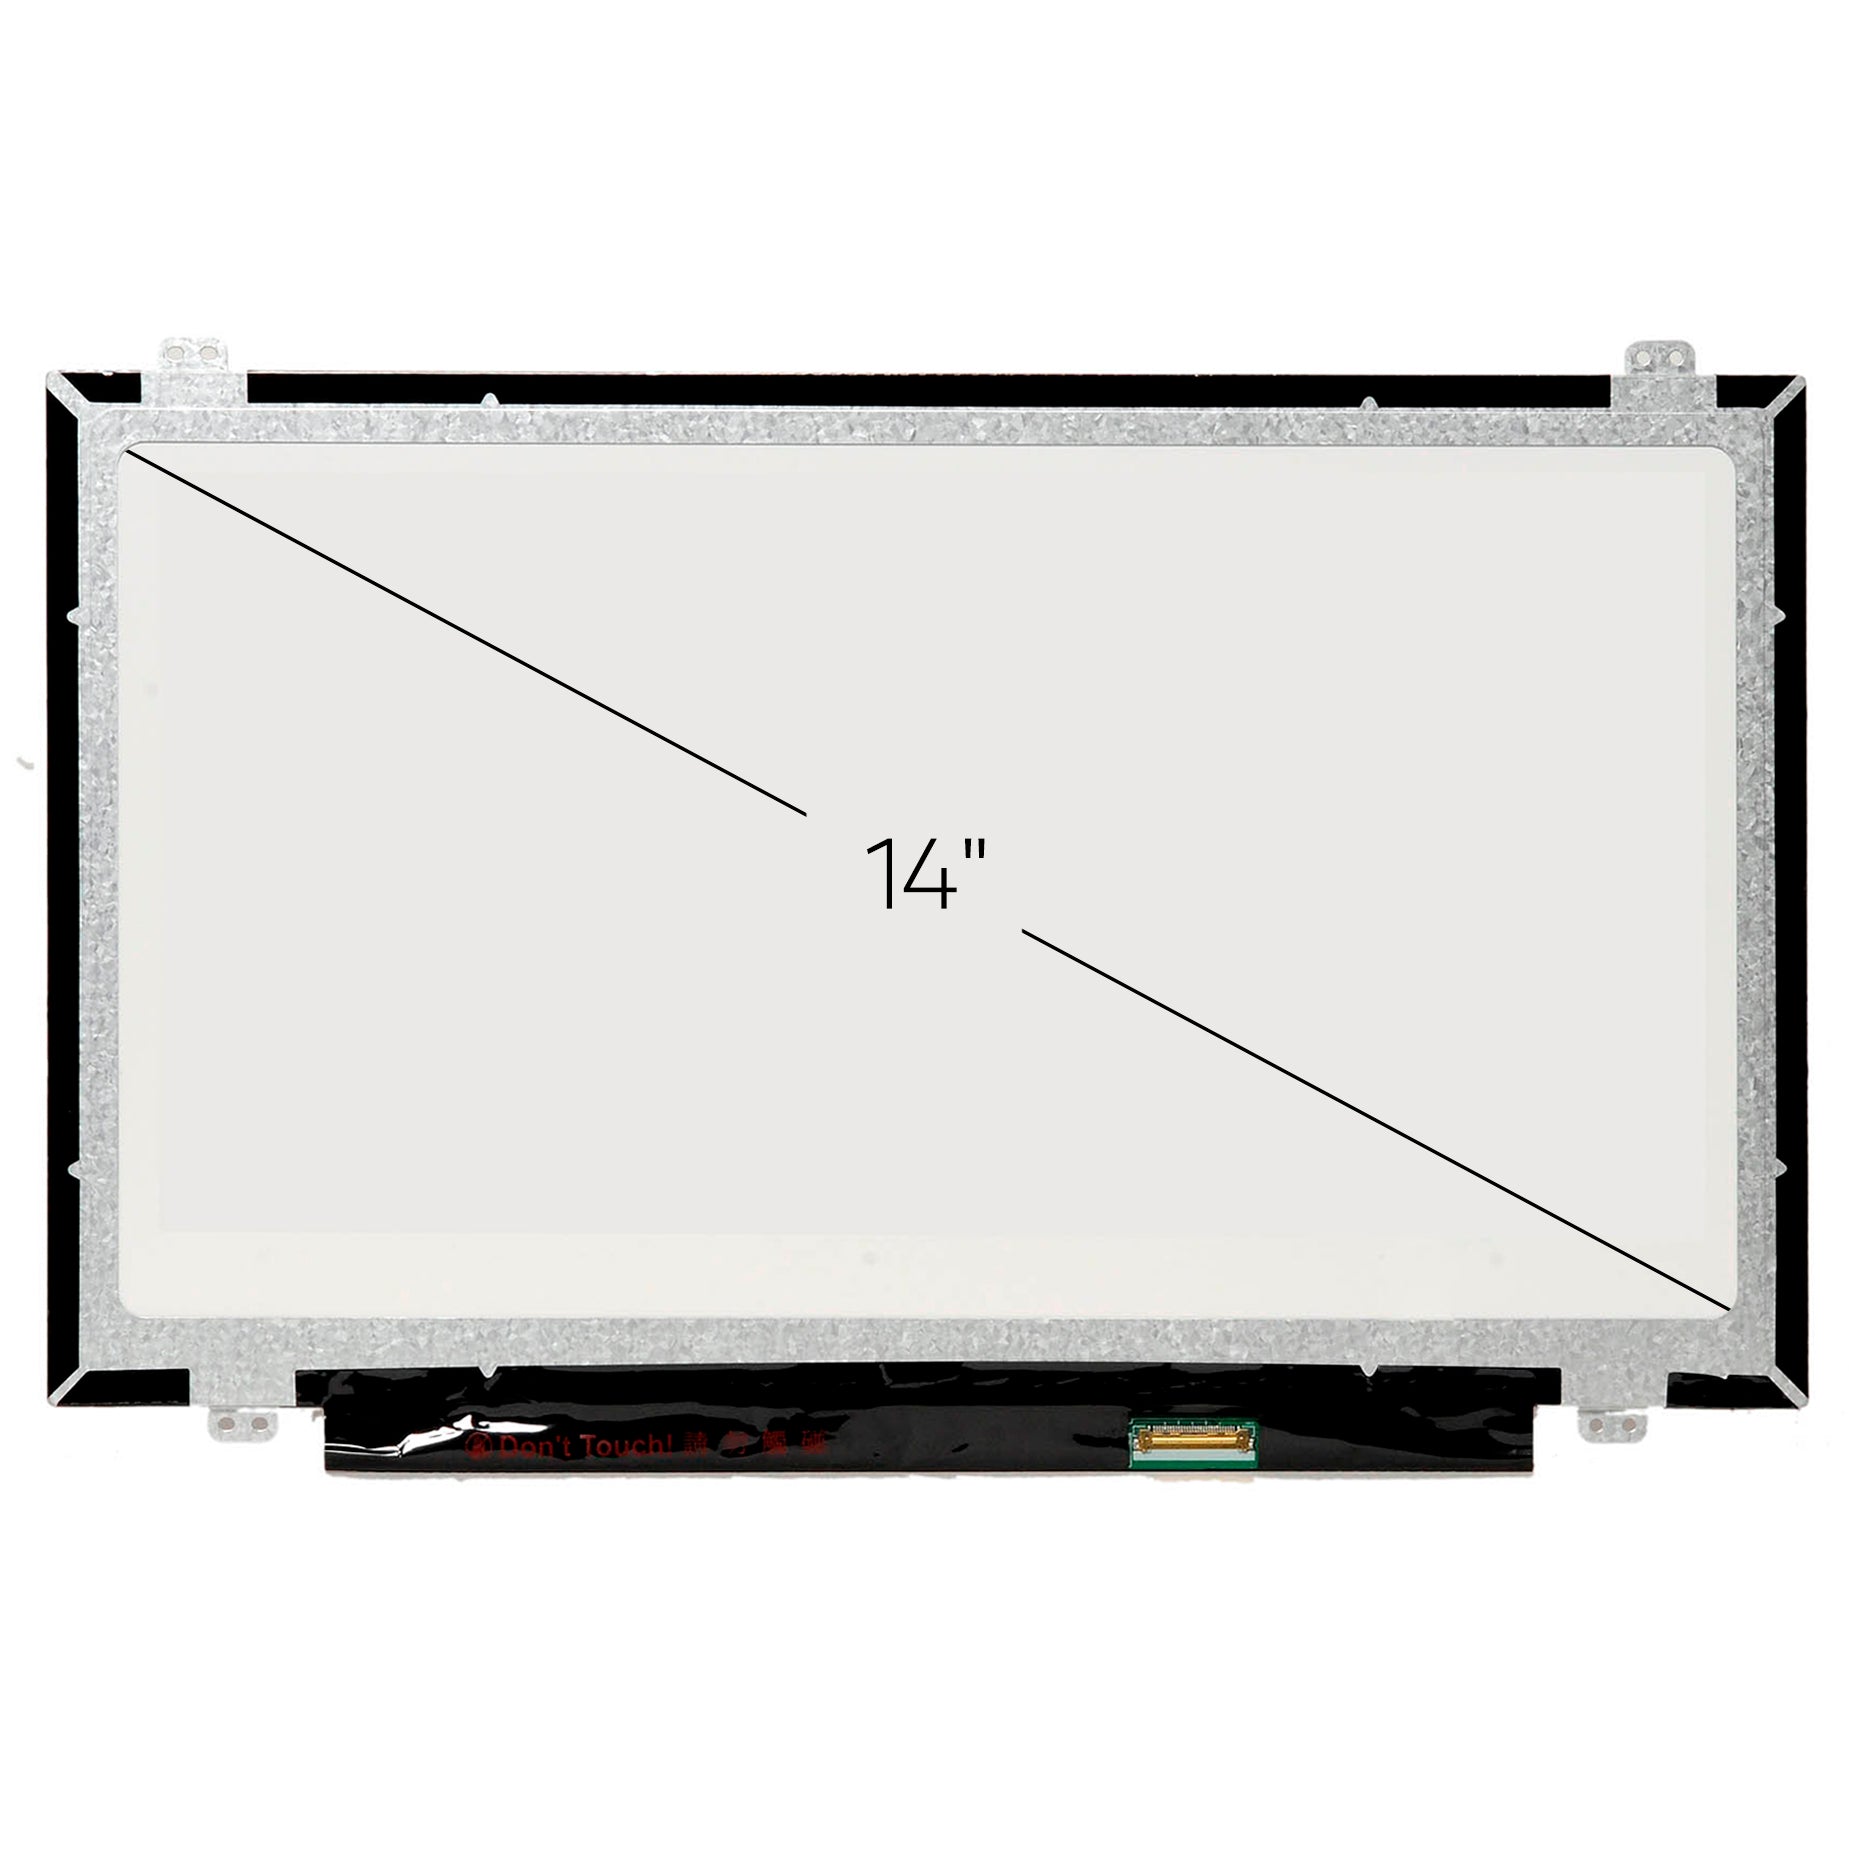 Screen Replacement for LP140WH2(TP)(T2) HD 1366x768 Glossy LCD LED Display